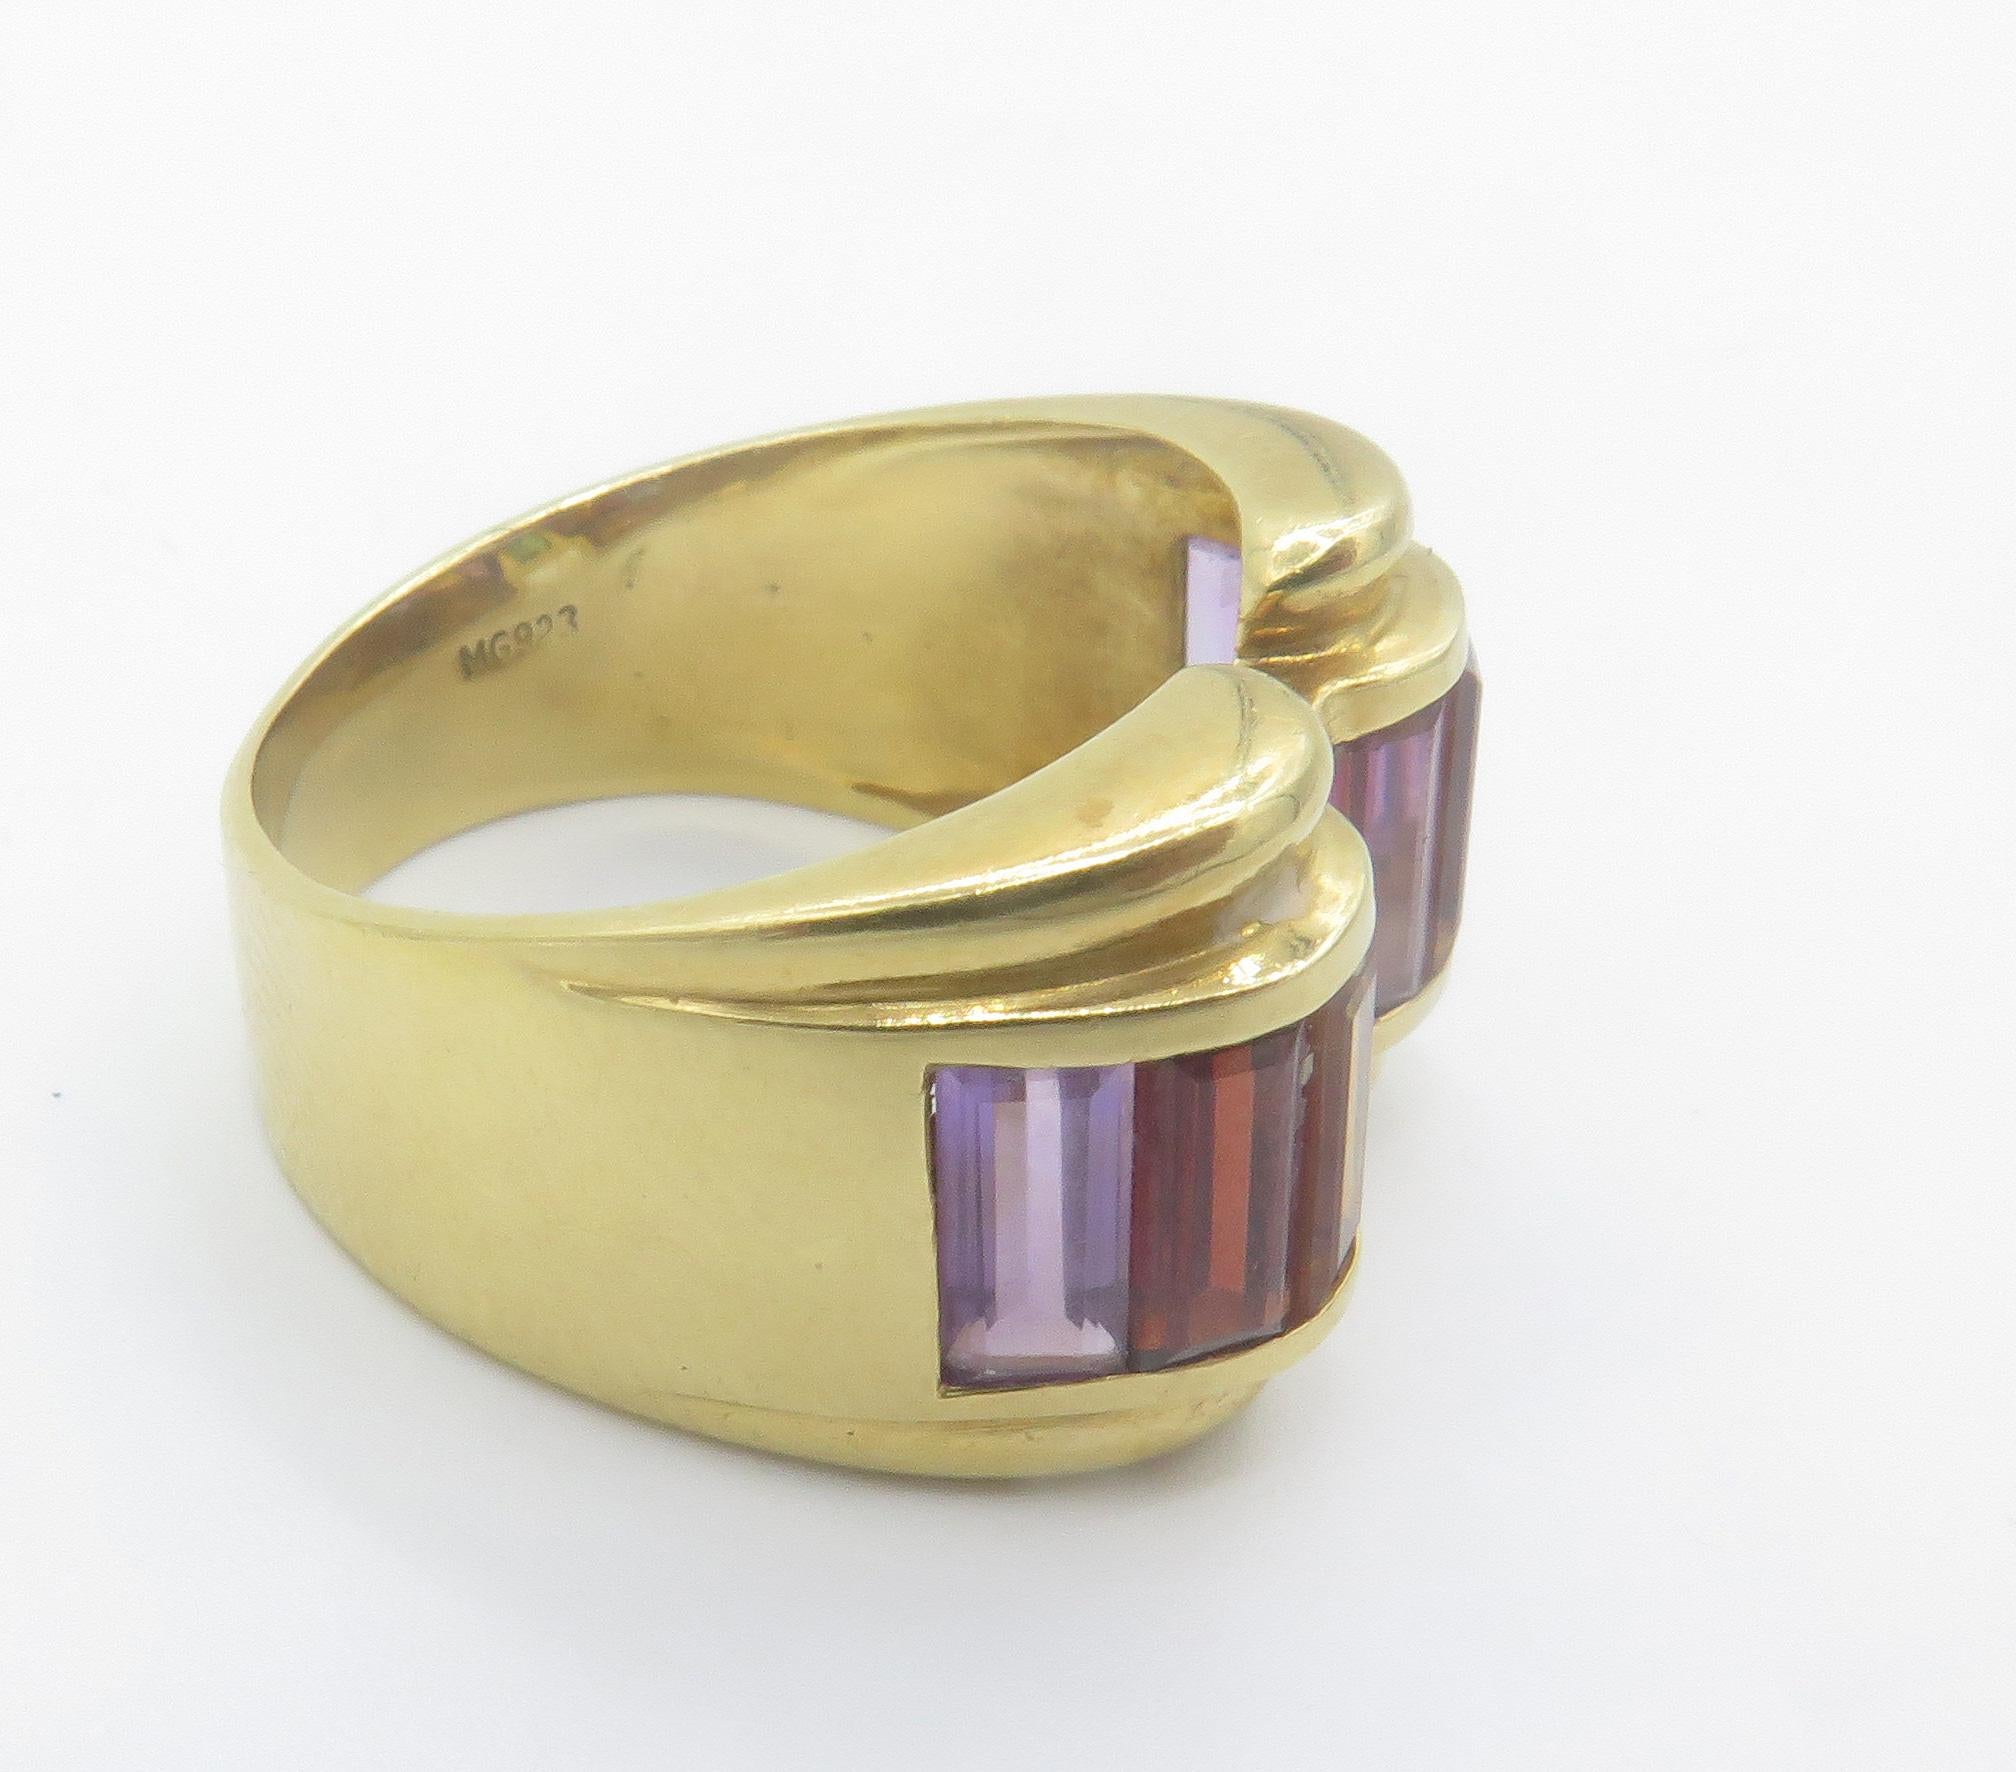 18kt, yellow gold, multi colored stone ring. This, beautifully crafted ring features a matching array of gemstone such as amethyst, citrine, green tourmaline, and garnet all set perfectly the setting and design of this ring is beautifully done in